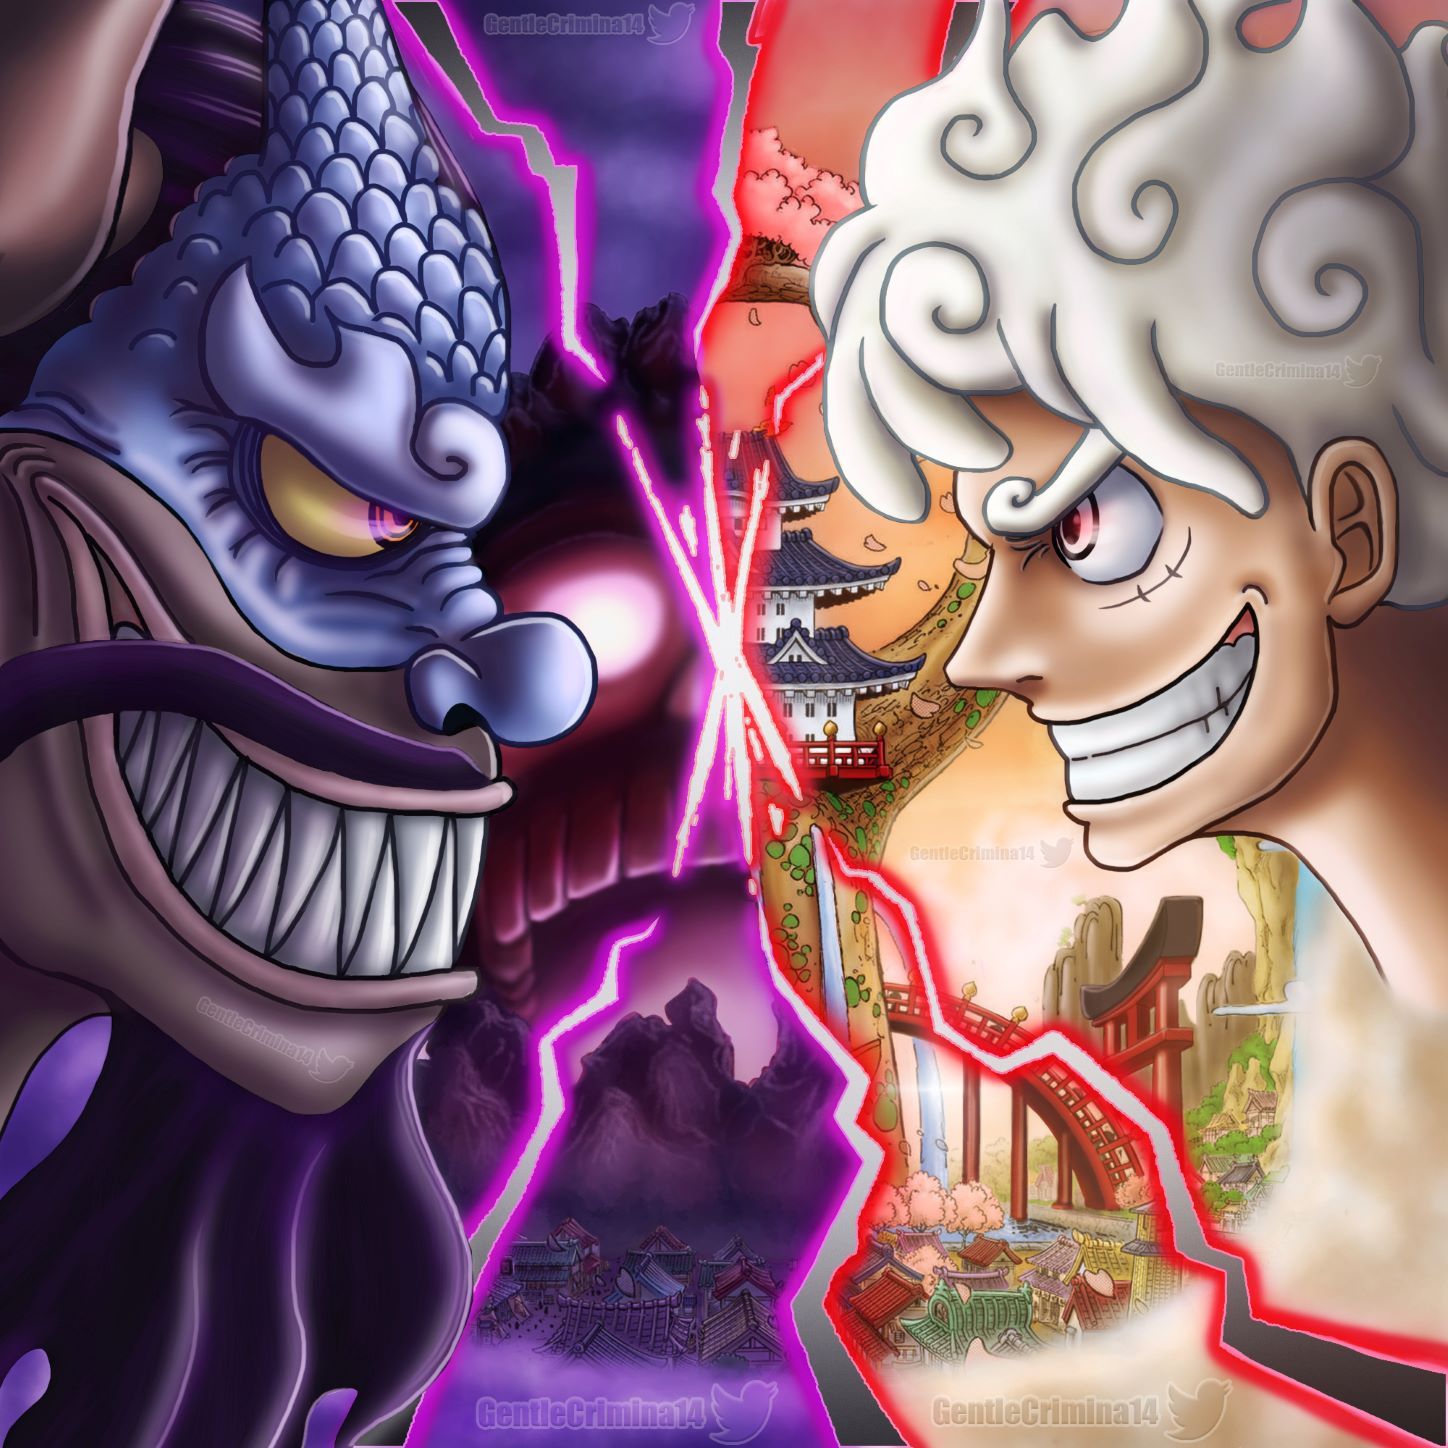 Revealed: The True Identity of Luffy's Devil Fruit and Kaido's Strength in One Piece after Wano Arc